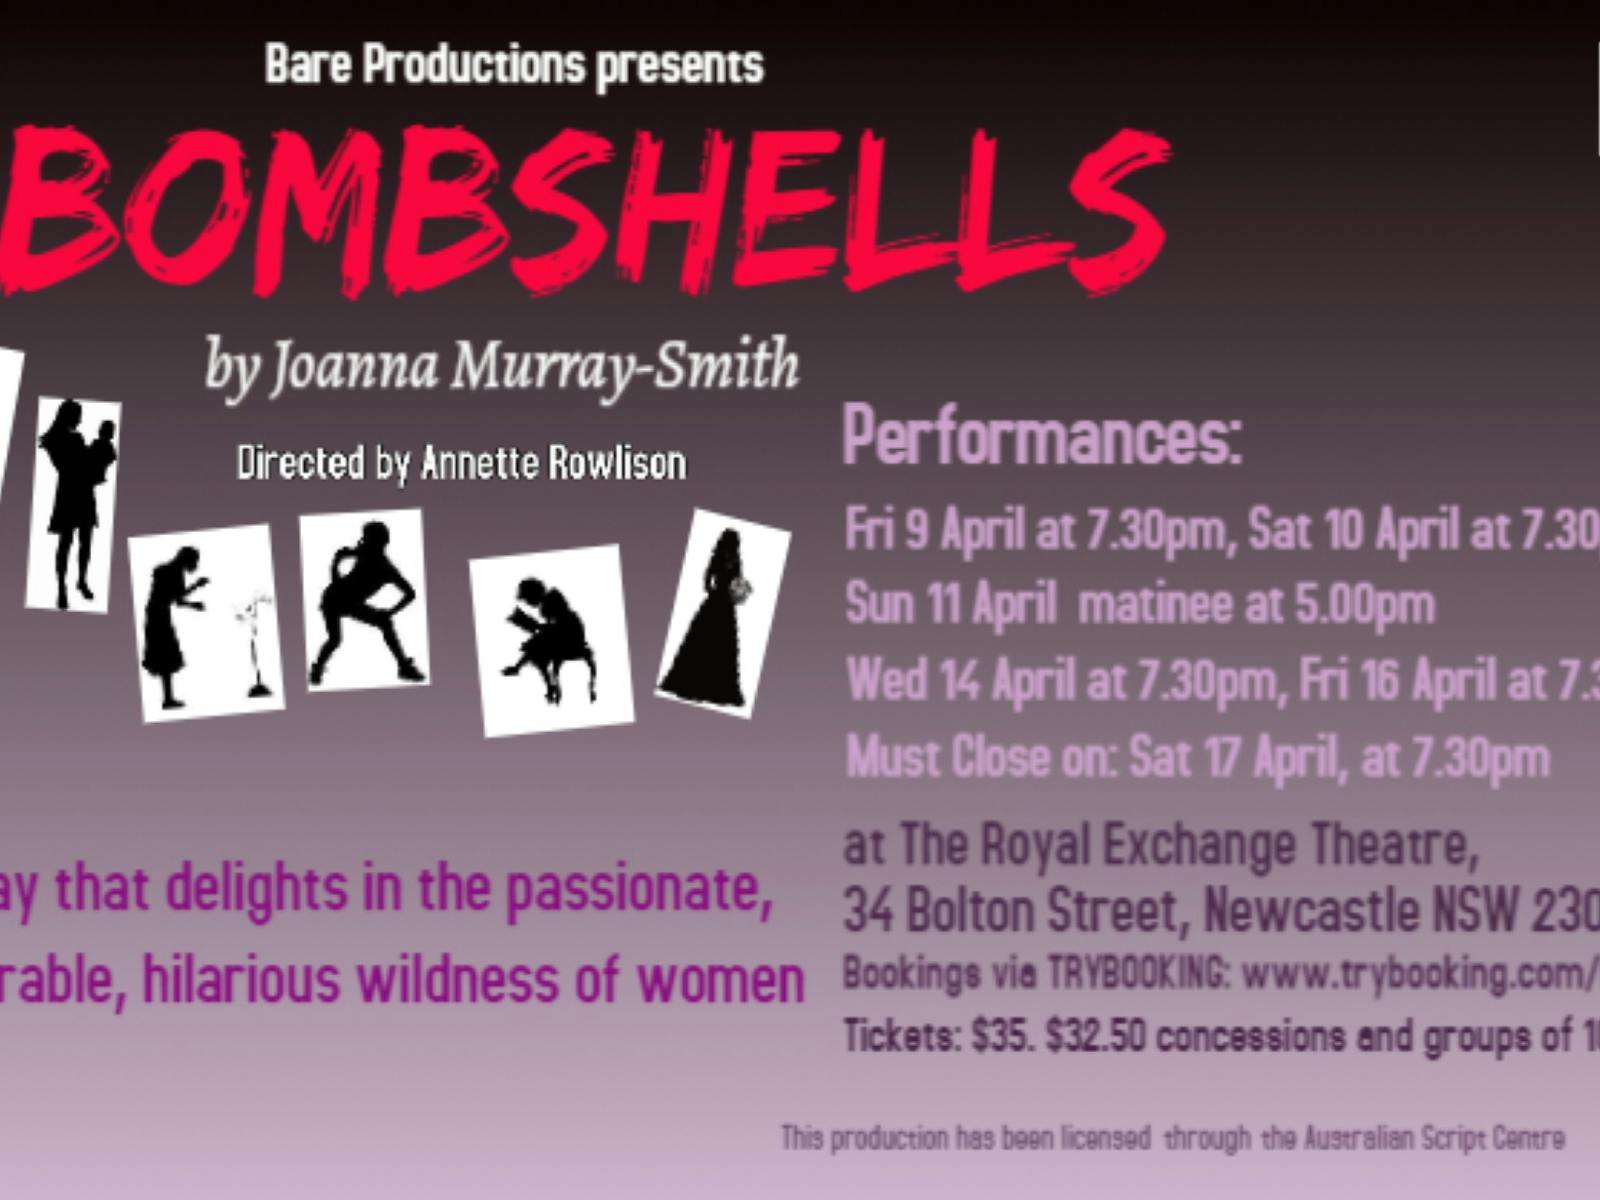 Poster for Bombshells at Royal Exchange Theatre, Newcastle in April 2021